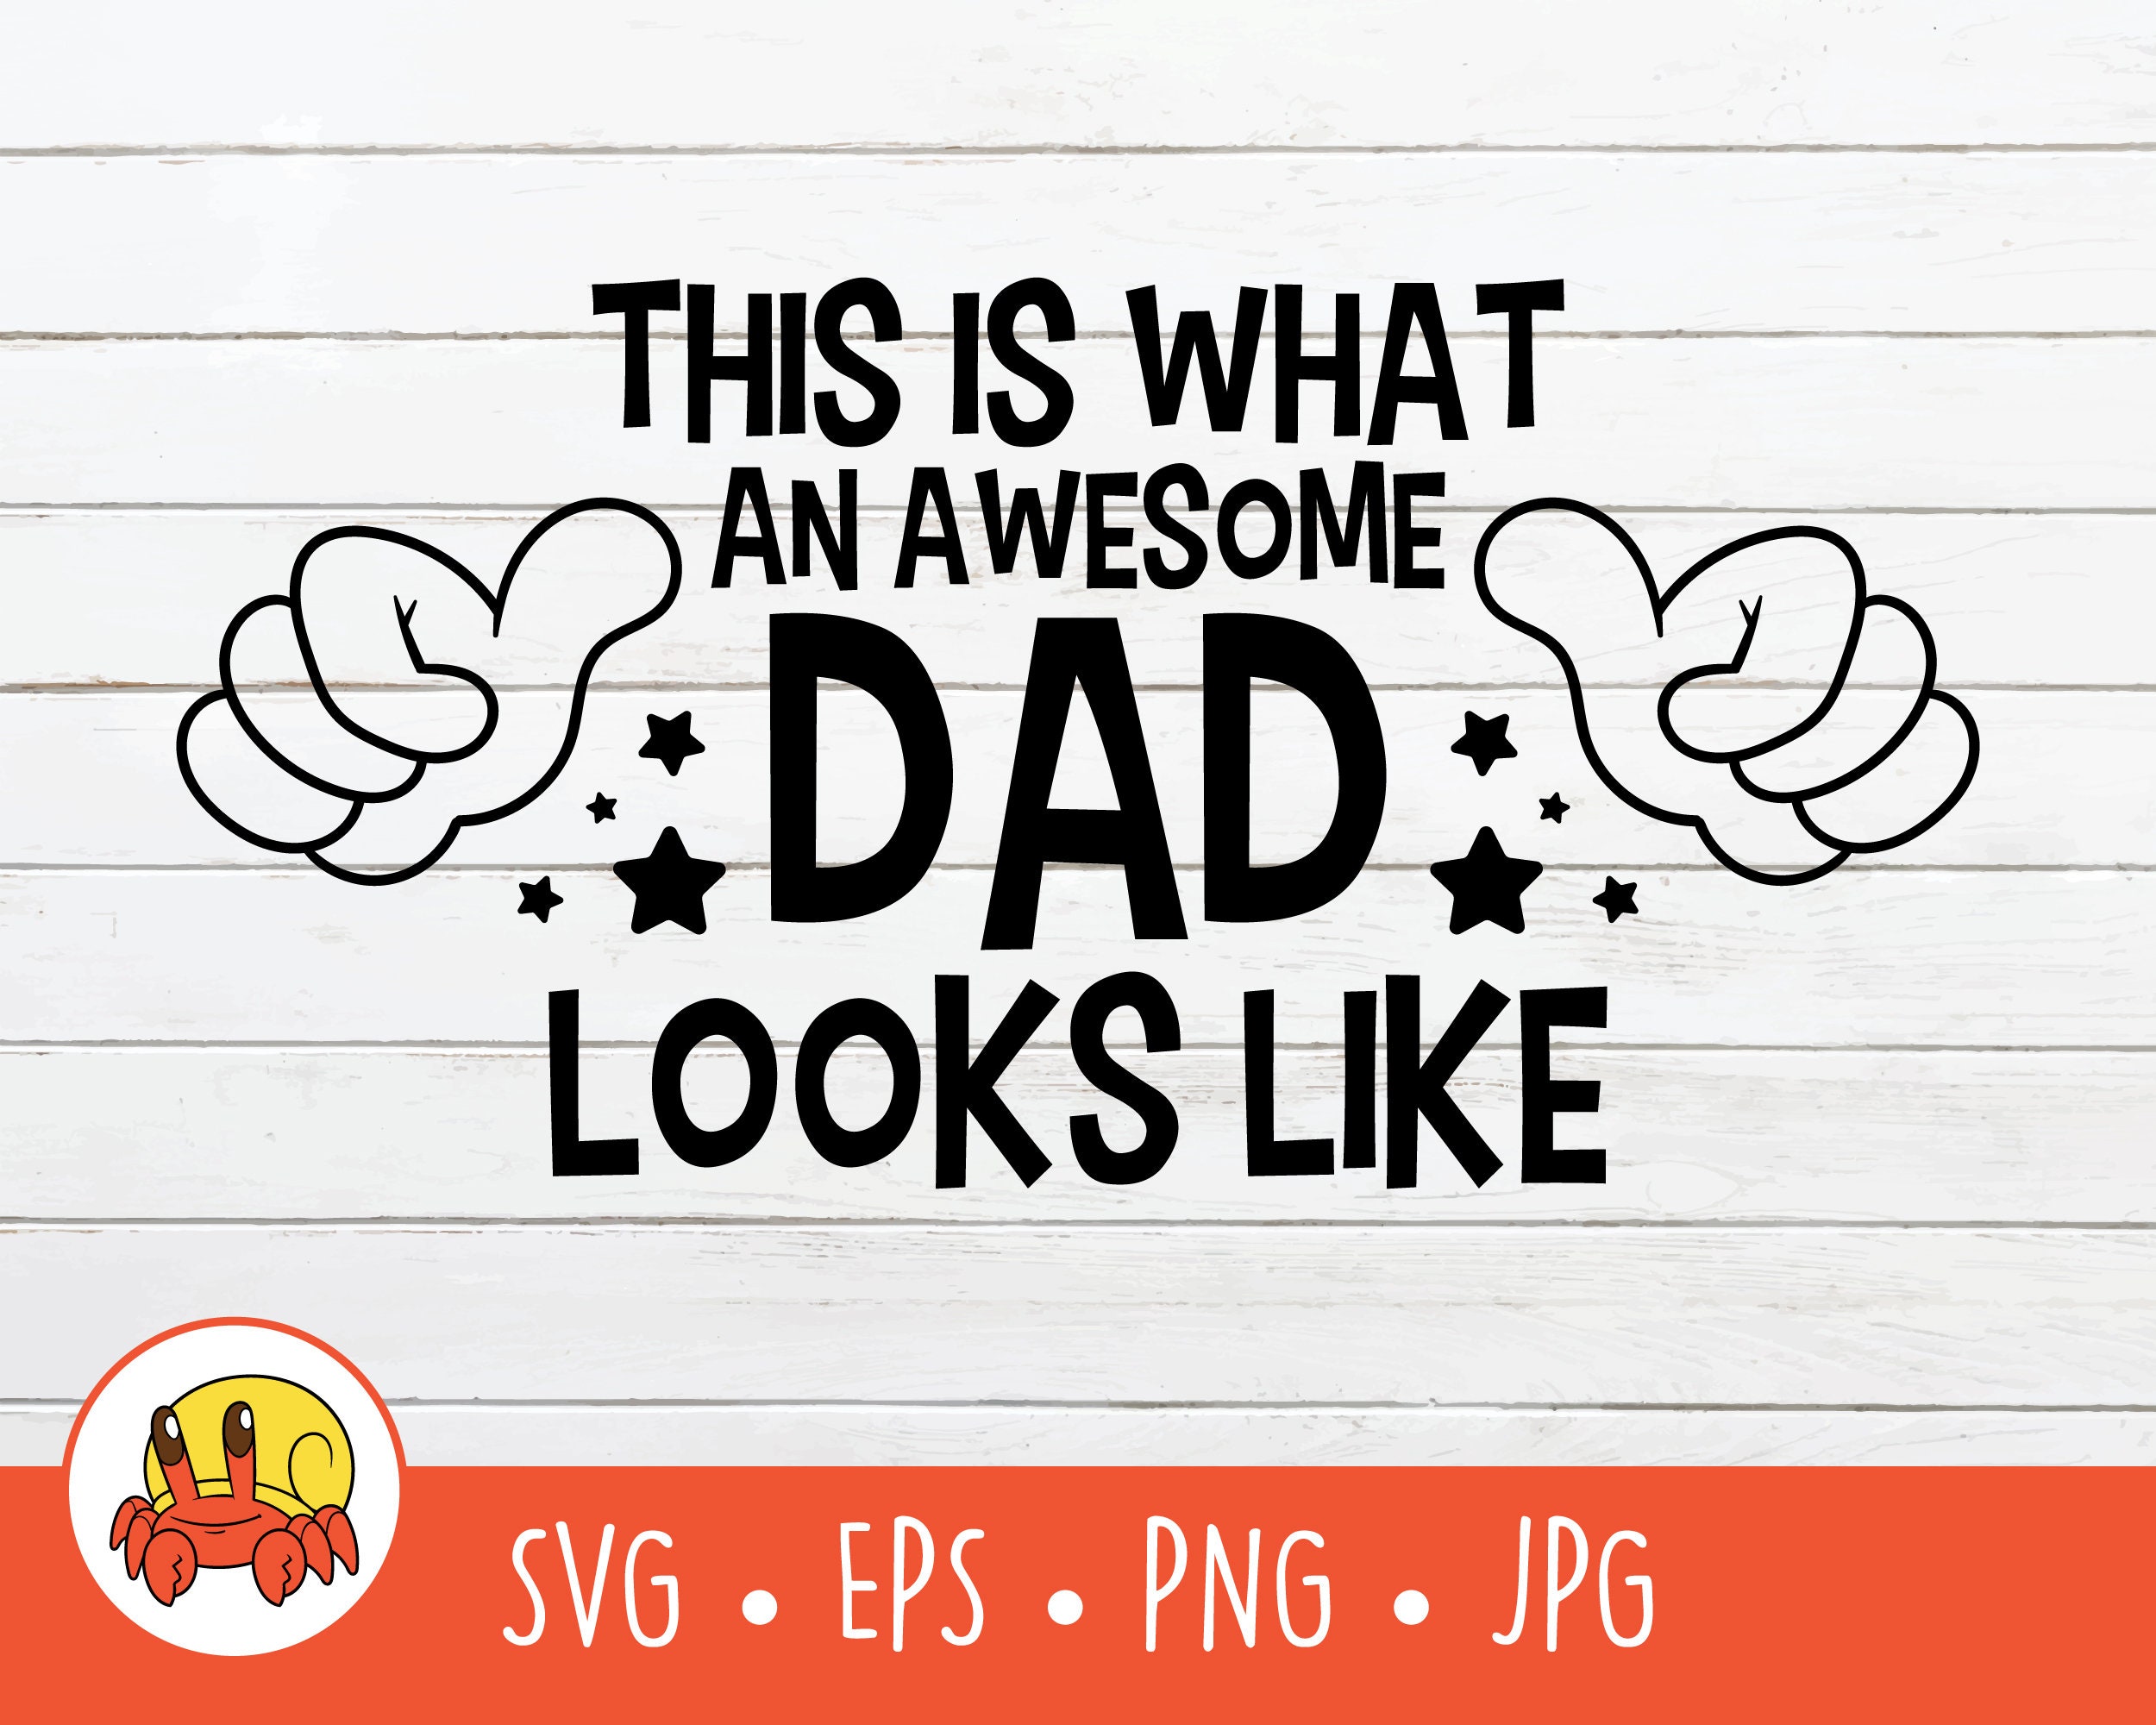 Download Awesome Dad SVG Printable Vector Awesome Dad Clipart This | Etsy